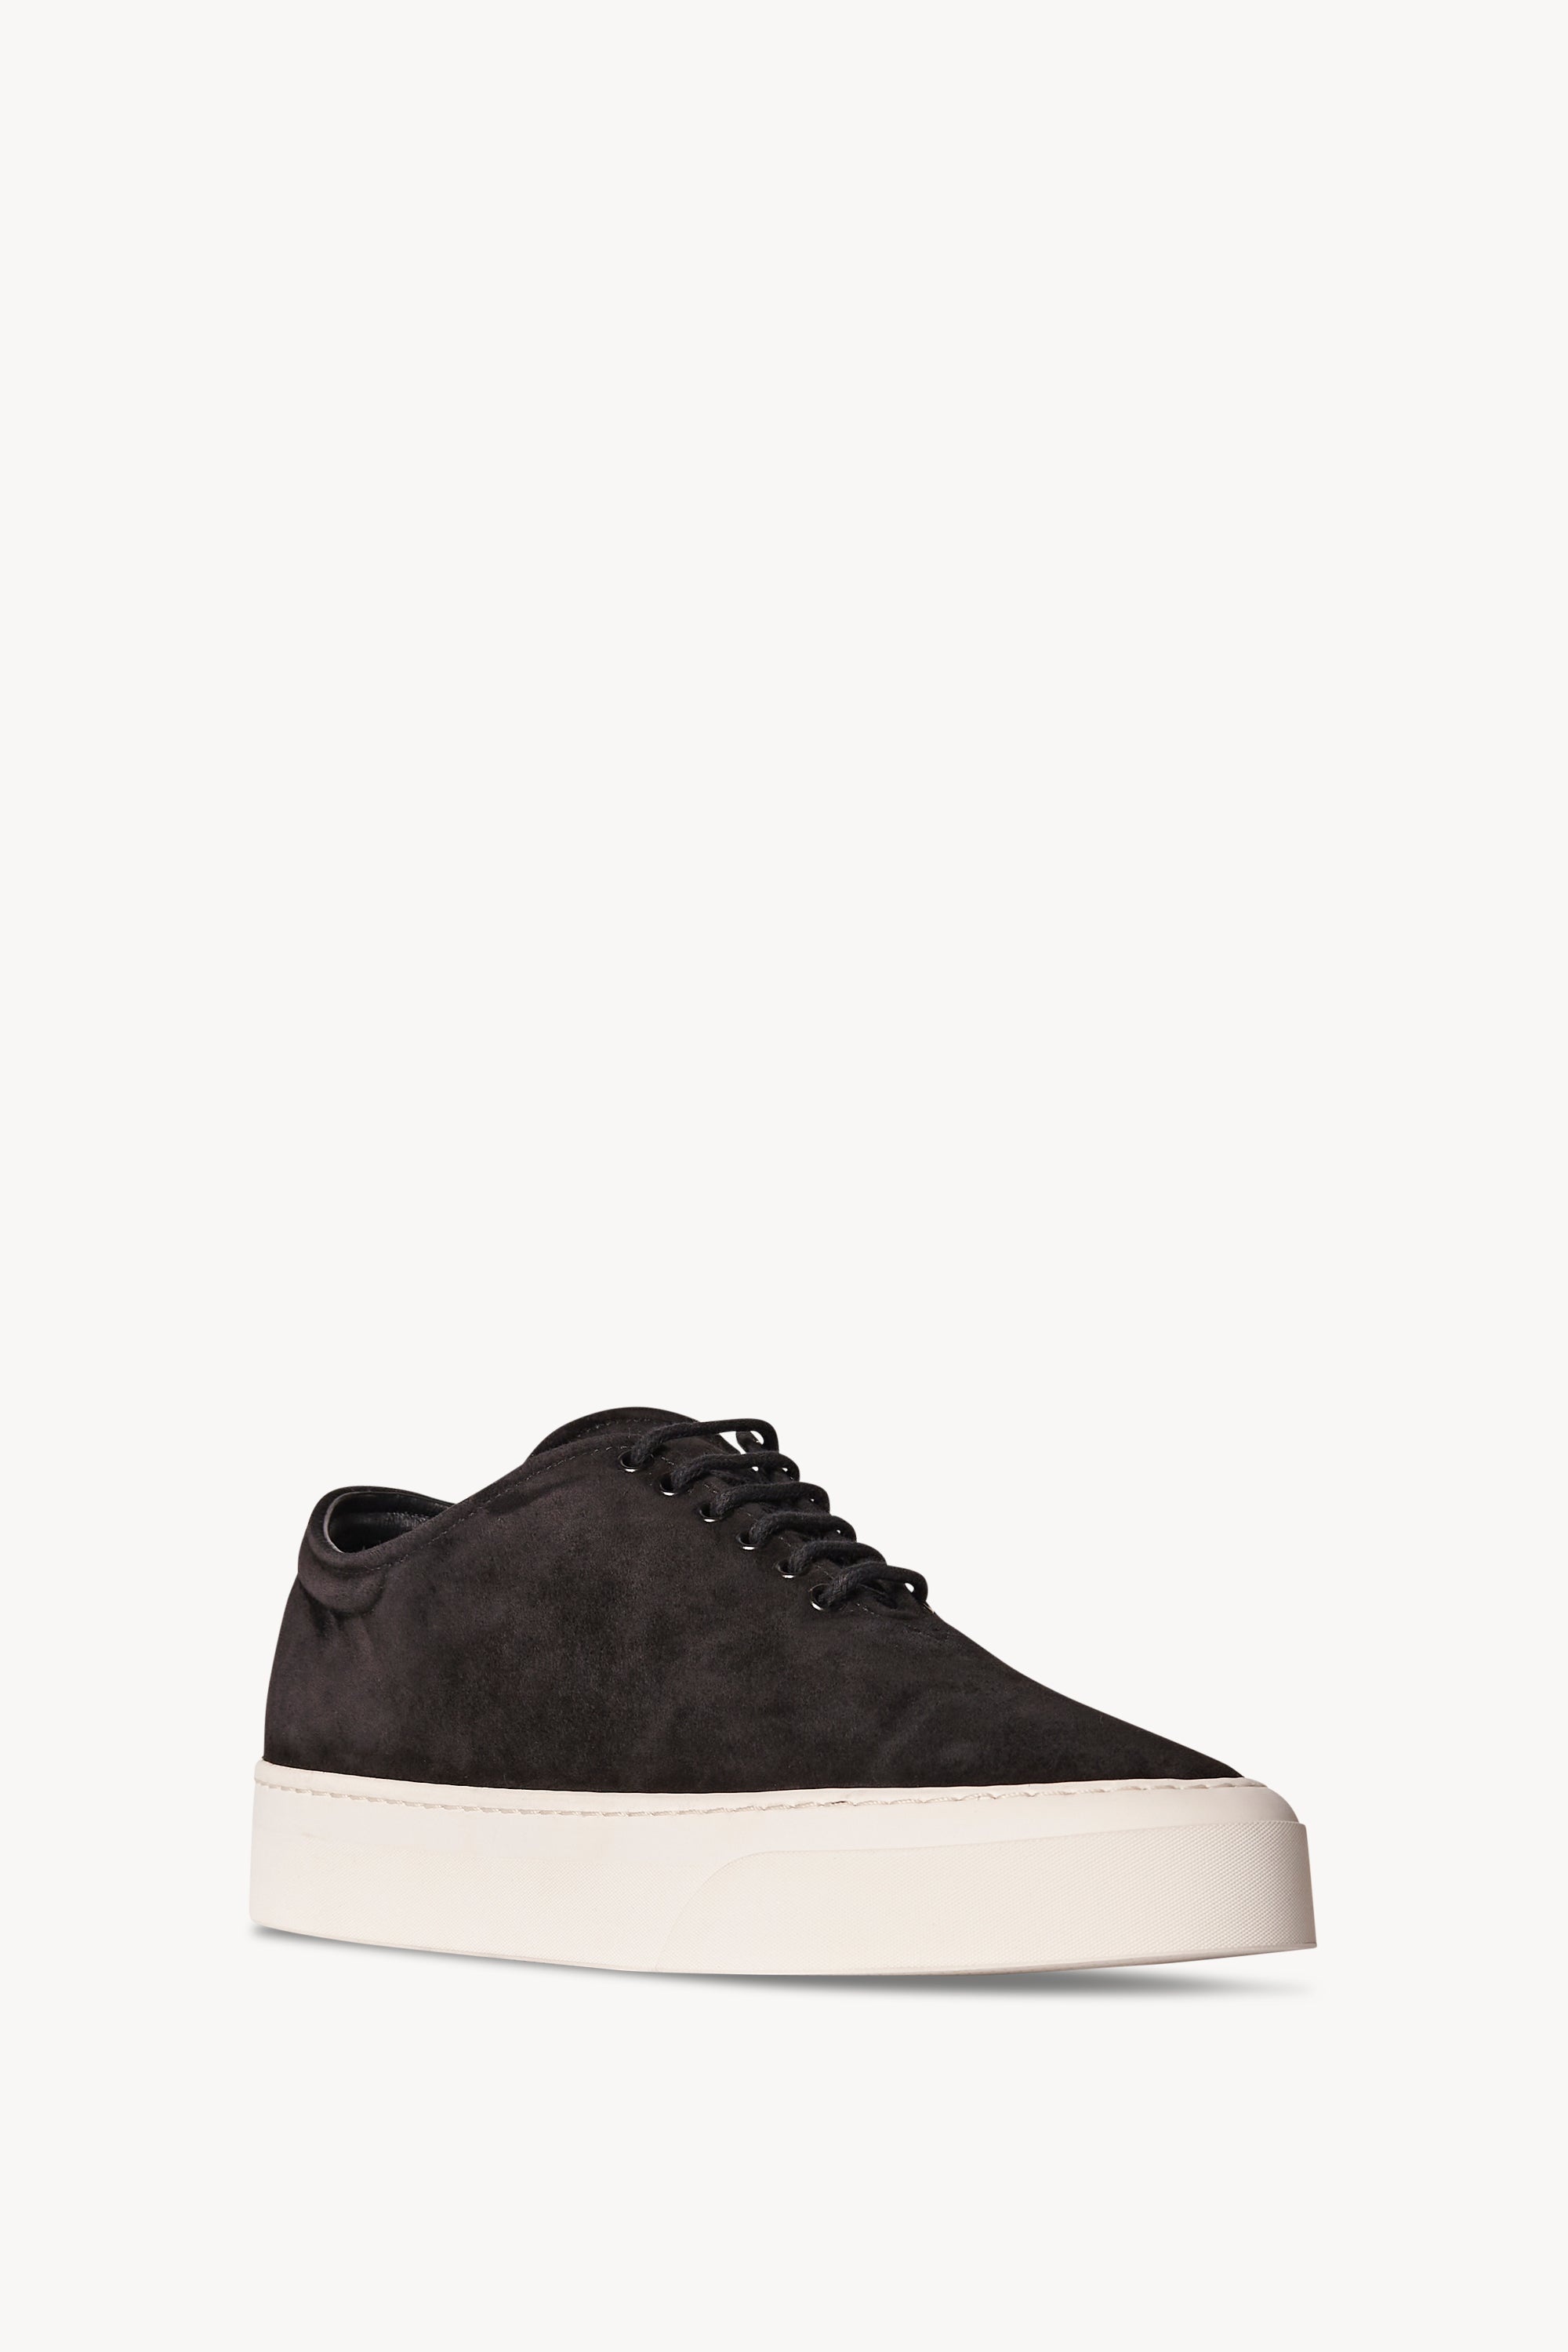 Marie H Lace-Up Sneaker in Suede - 2